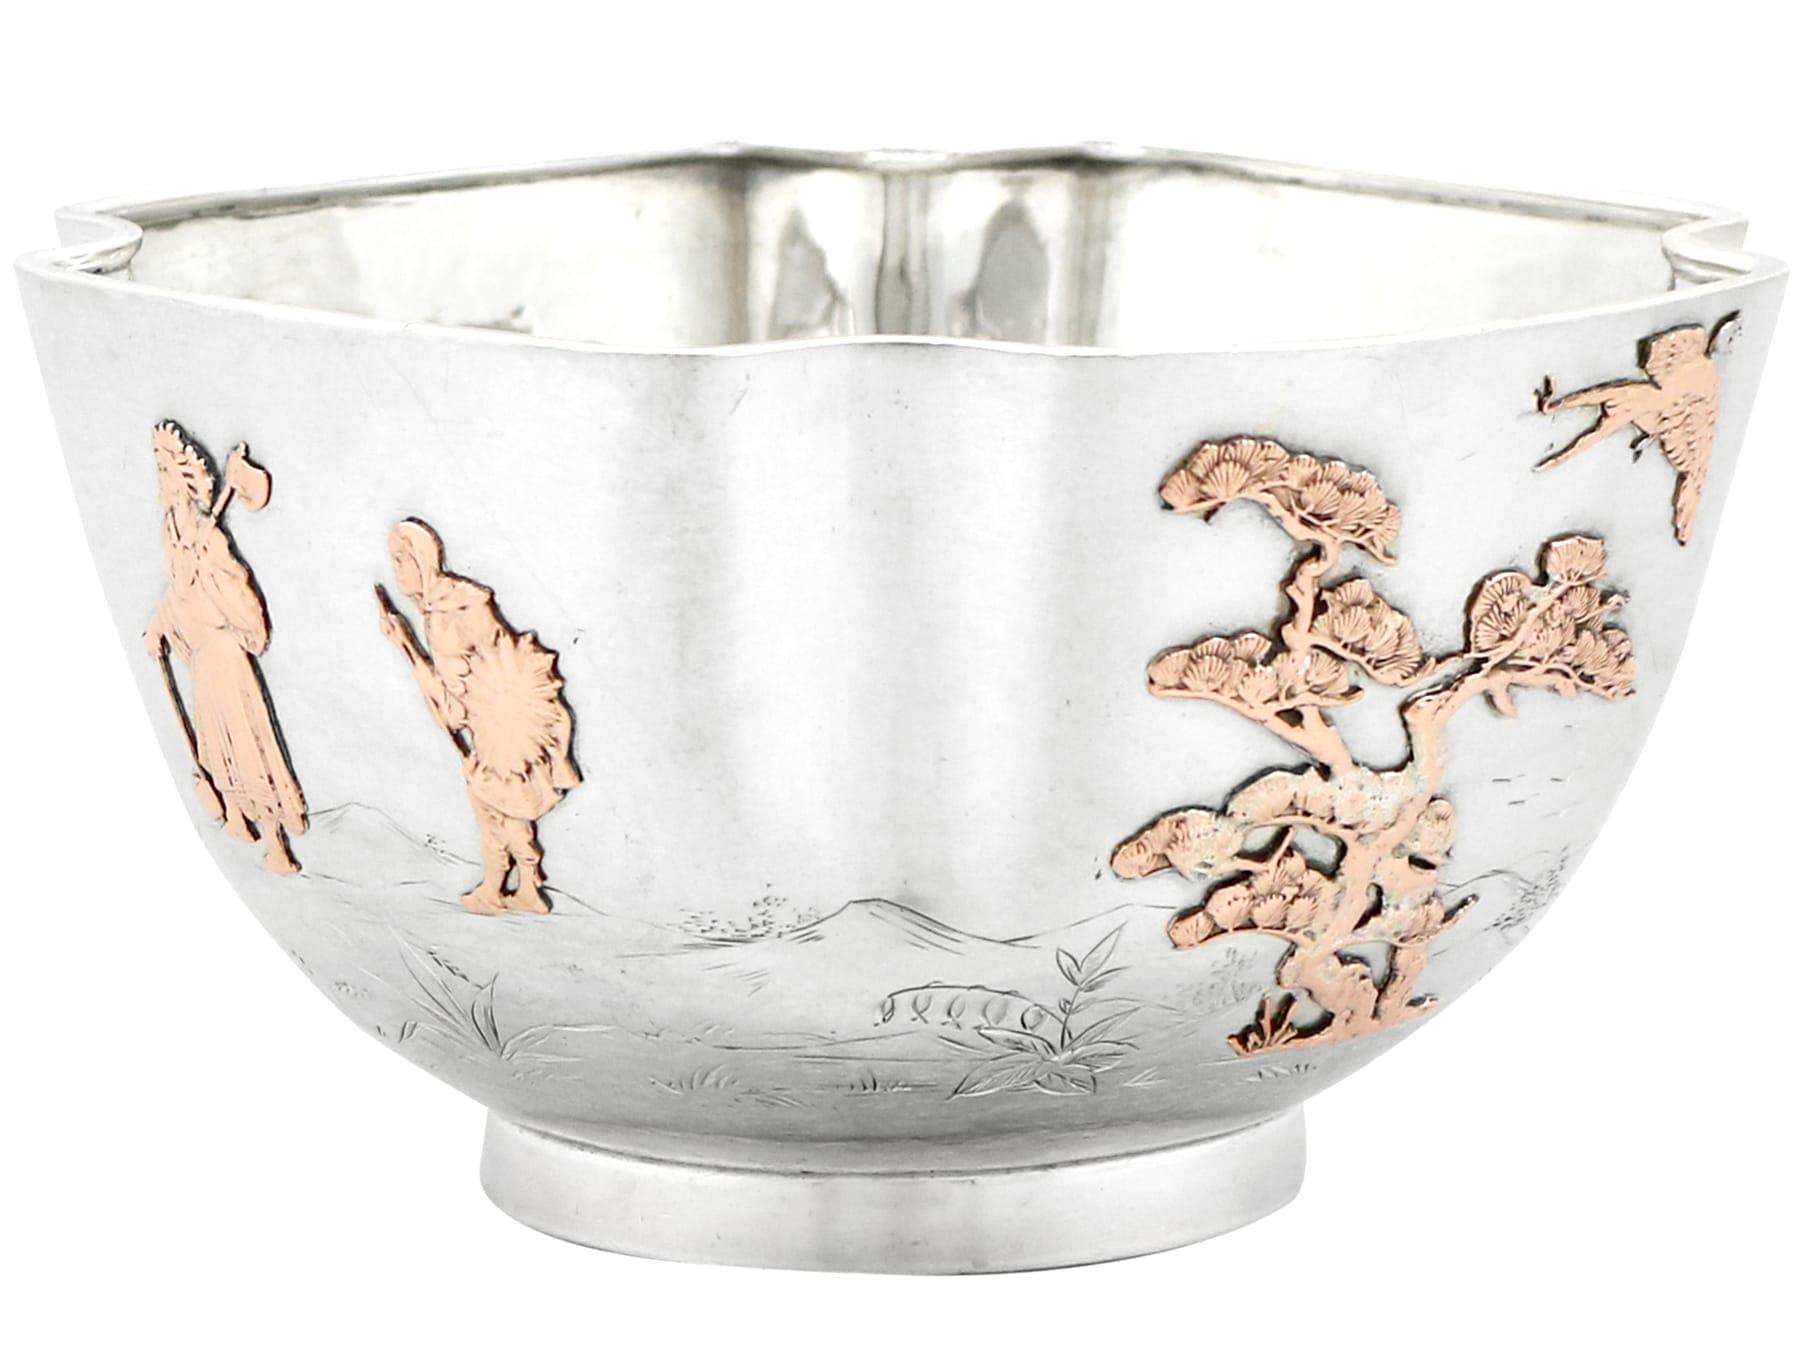 Antique American Sterling Silver Bowl Gorham Manufacturing Company  In Excellent Condition For Sale In Jesmond, Newcastle Upon Tyne